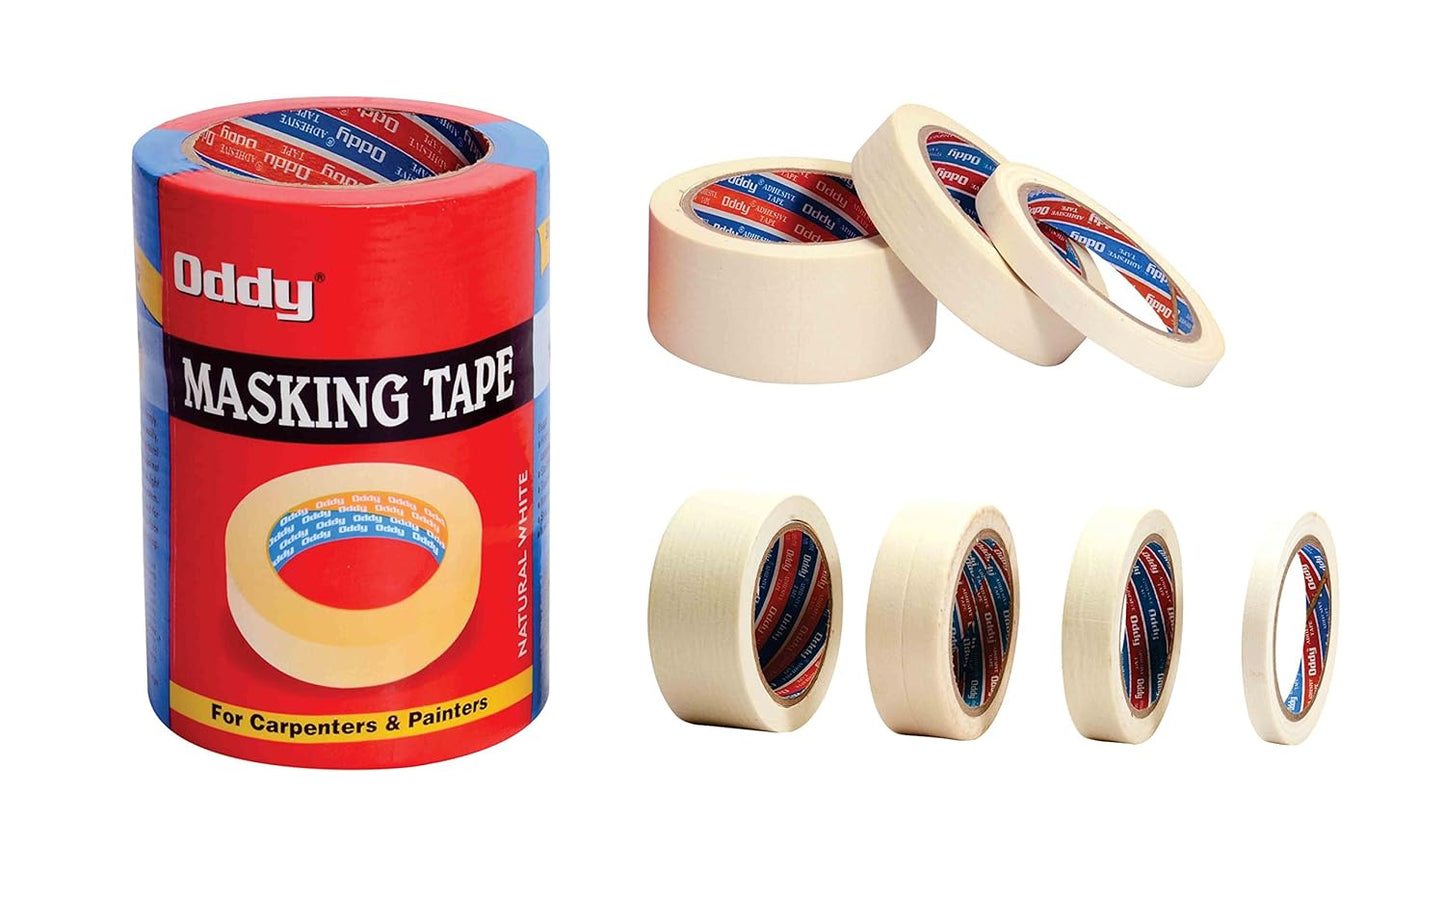 Oddy 72mm Super Strong Self Adhesive Masking Tape - 20 Mtrs, Pack of 1